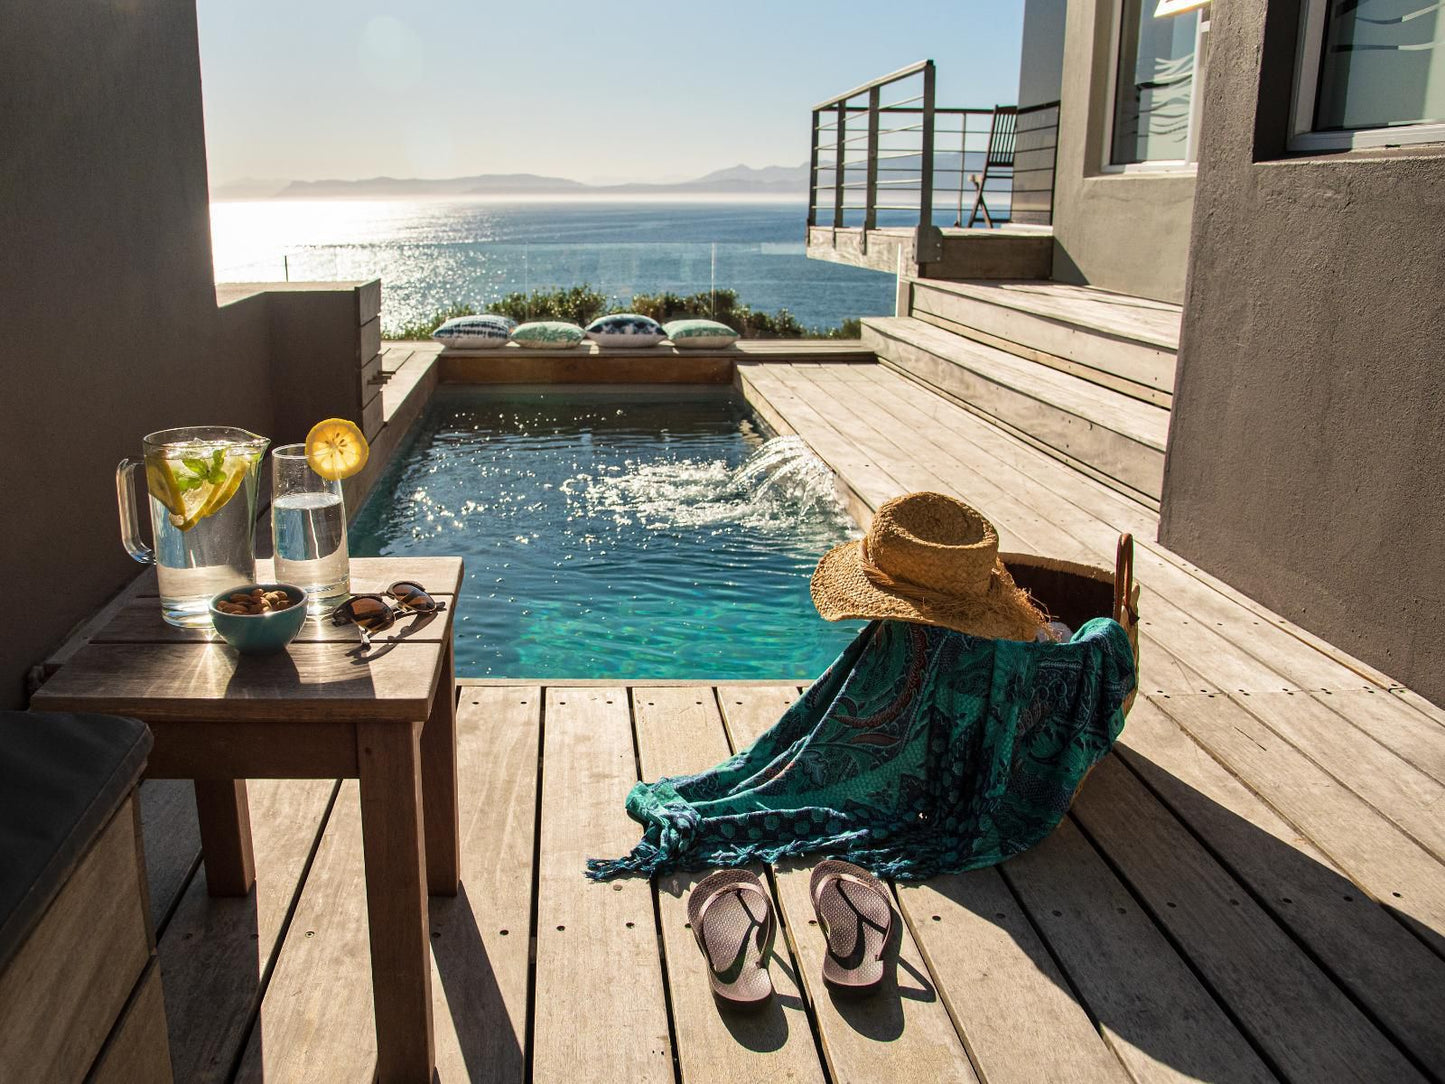 Whalesong Lodge De Kelders Western Cape South Africa Beach, Nature, Sand, Swimming Pool